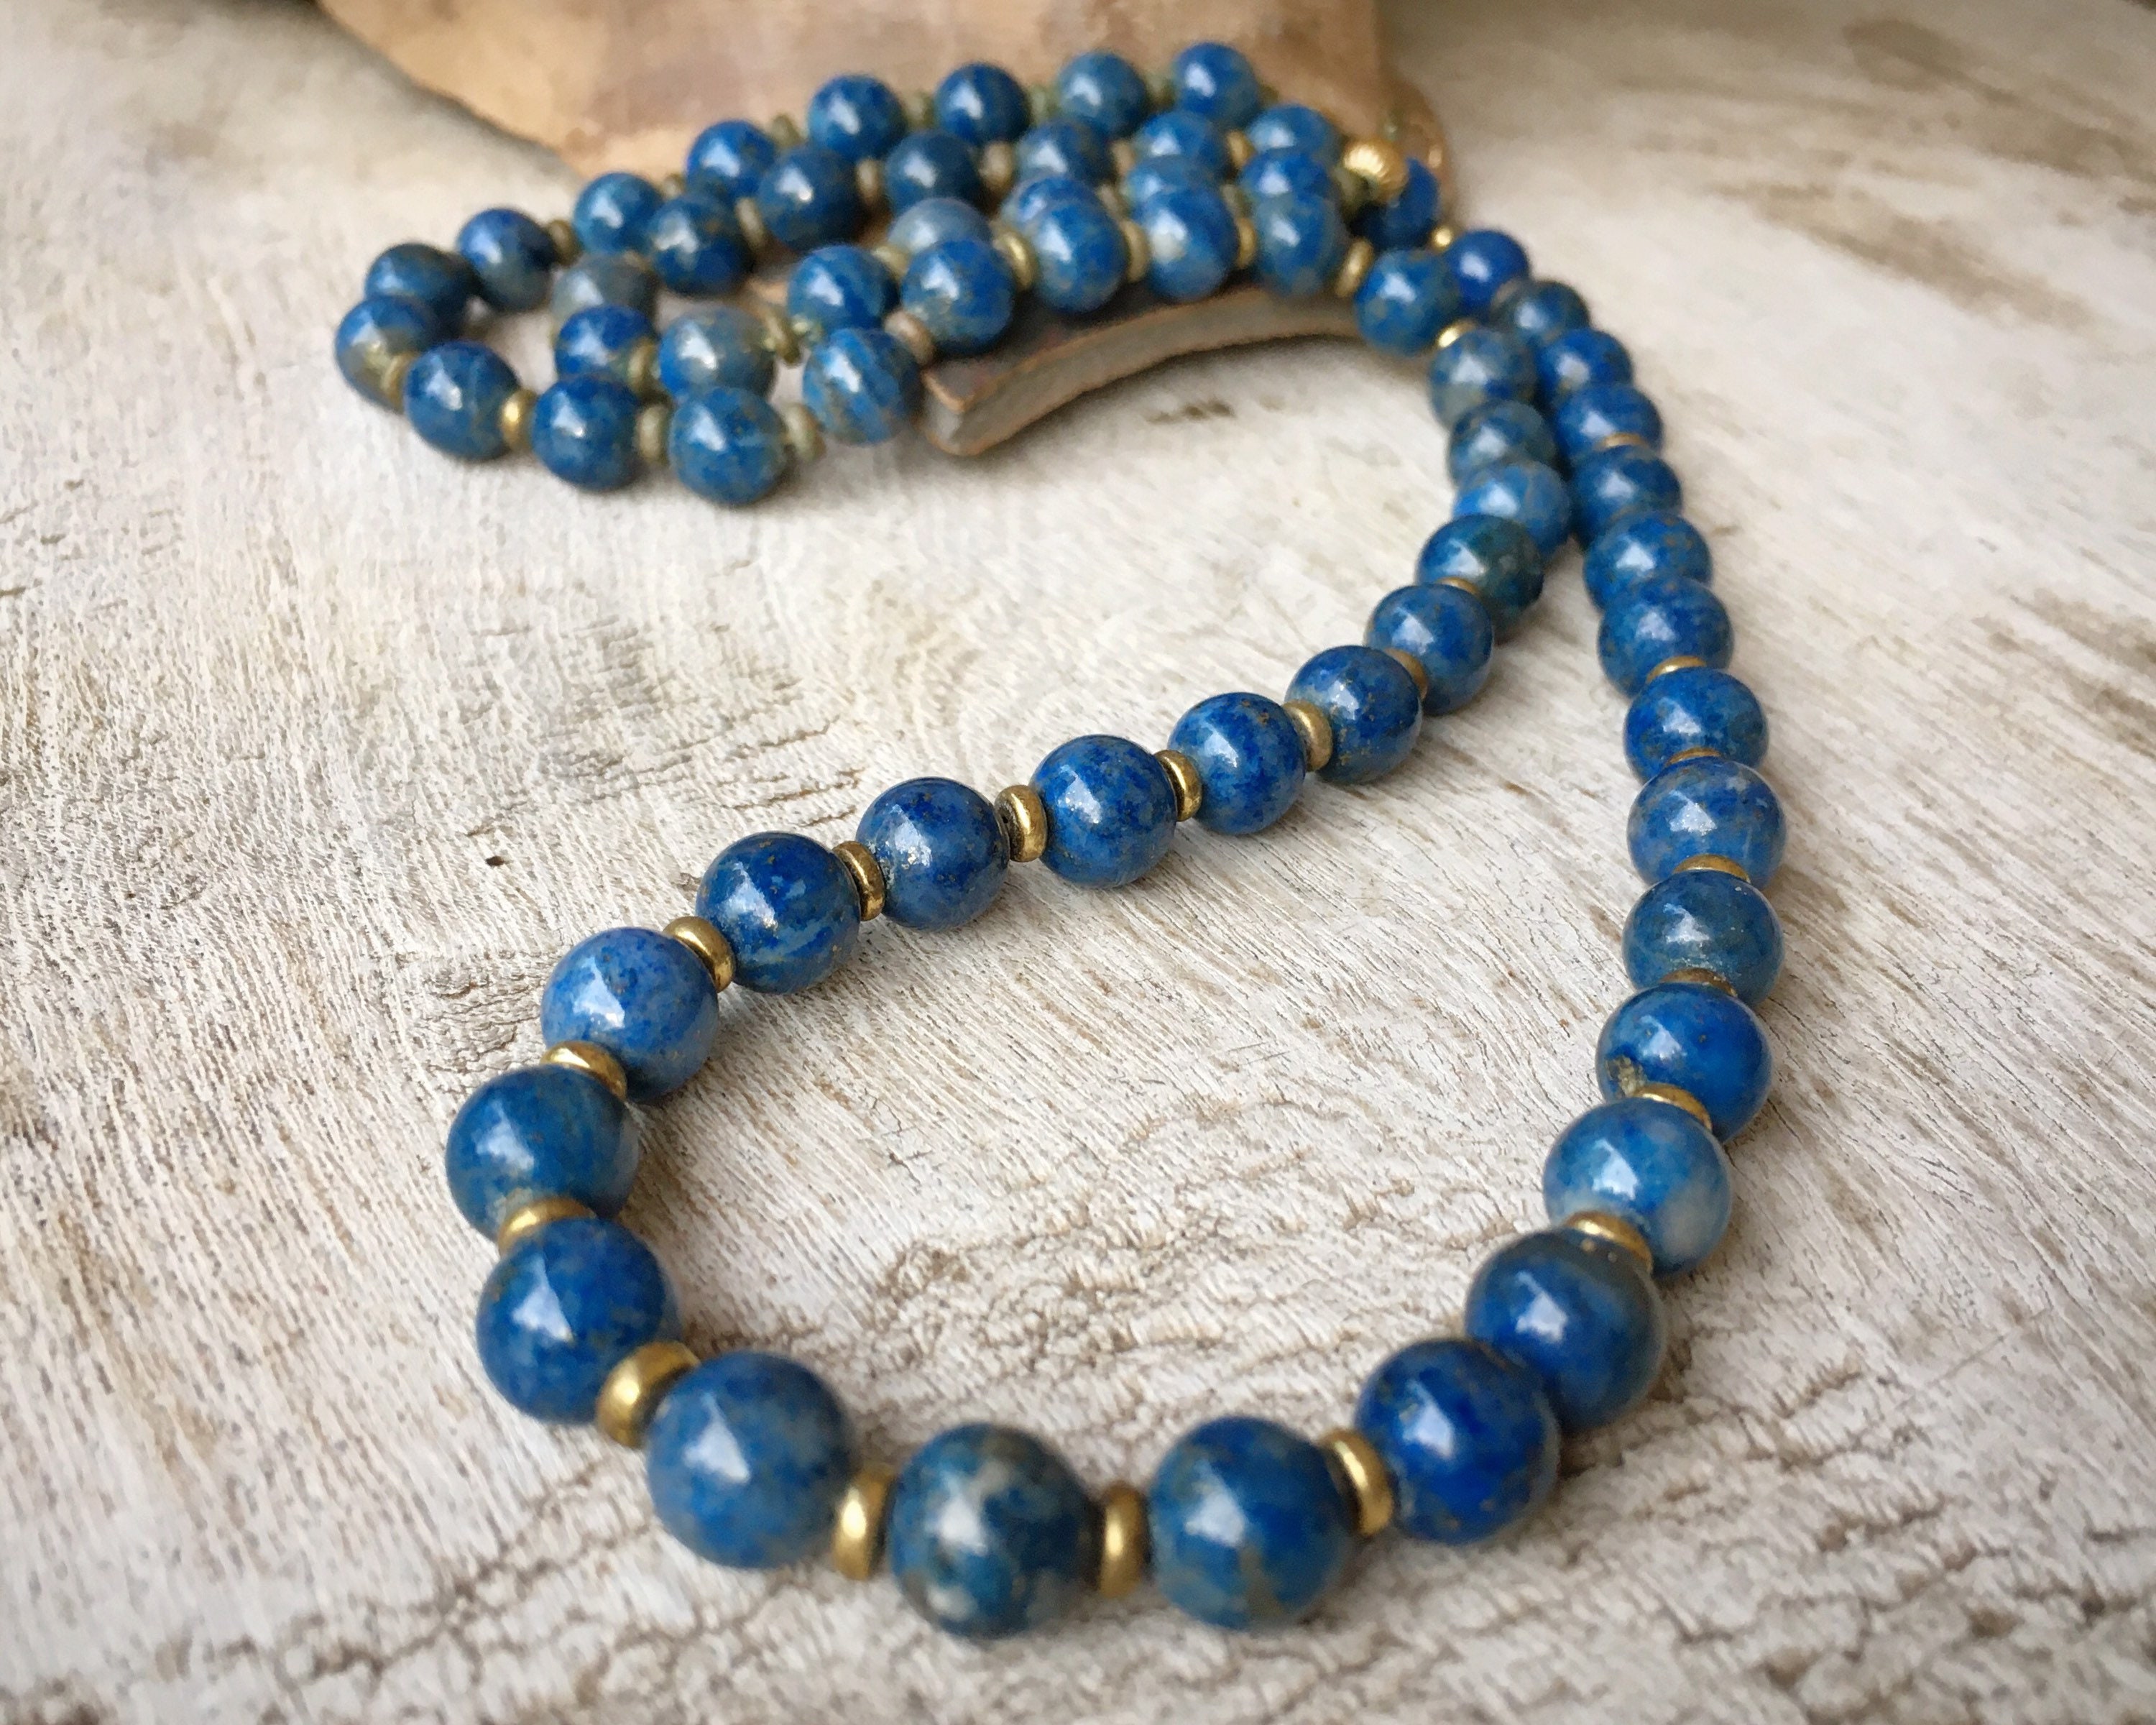 Vintage Lapis Lazuli Bead with Brass Spacer Necklace for Women, Estate ...